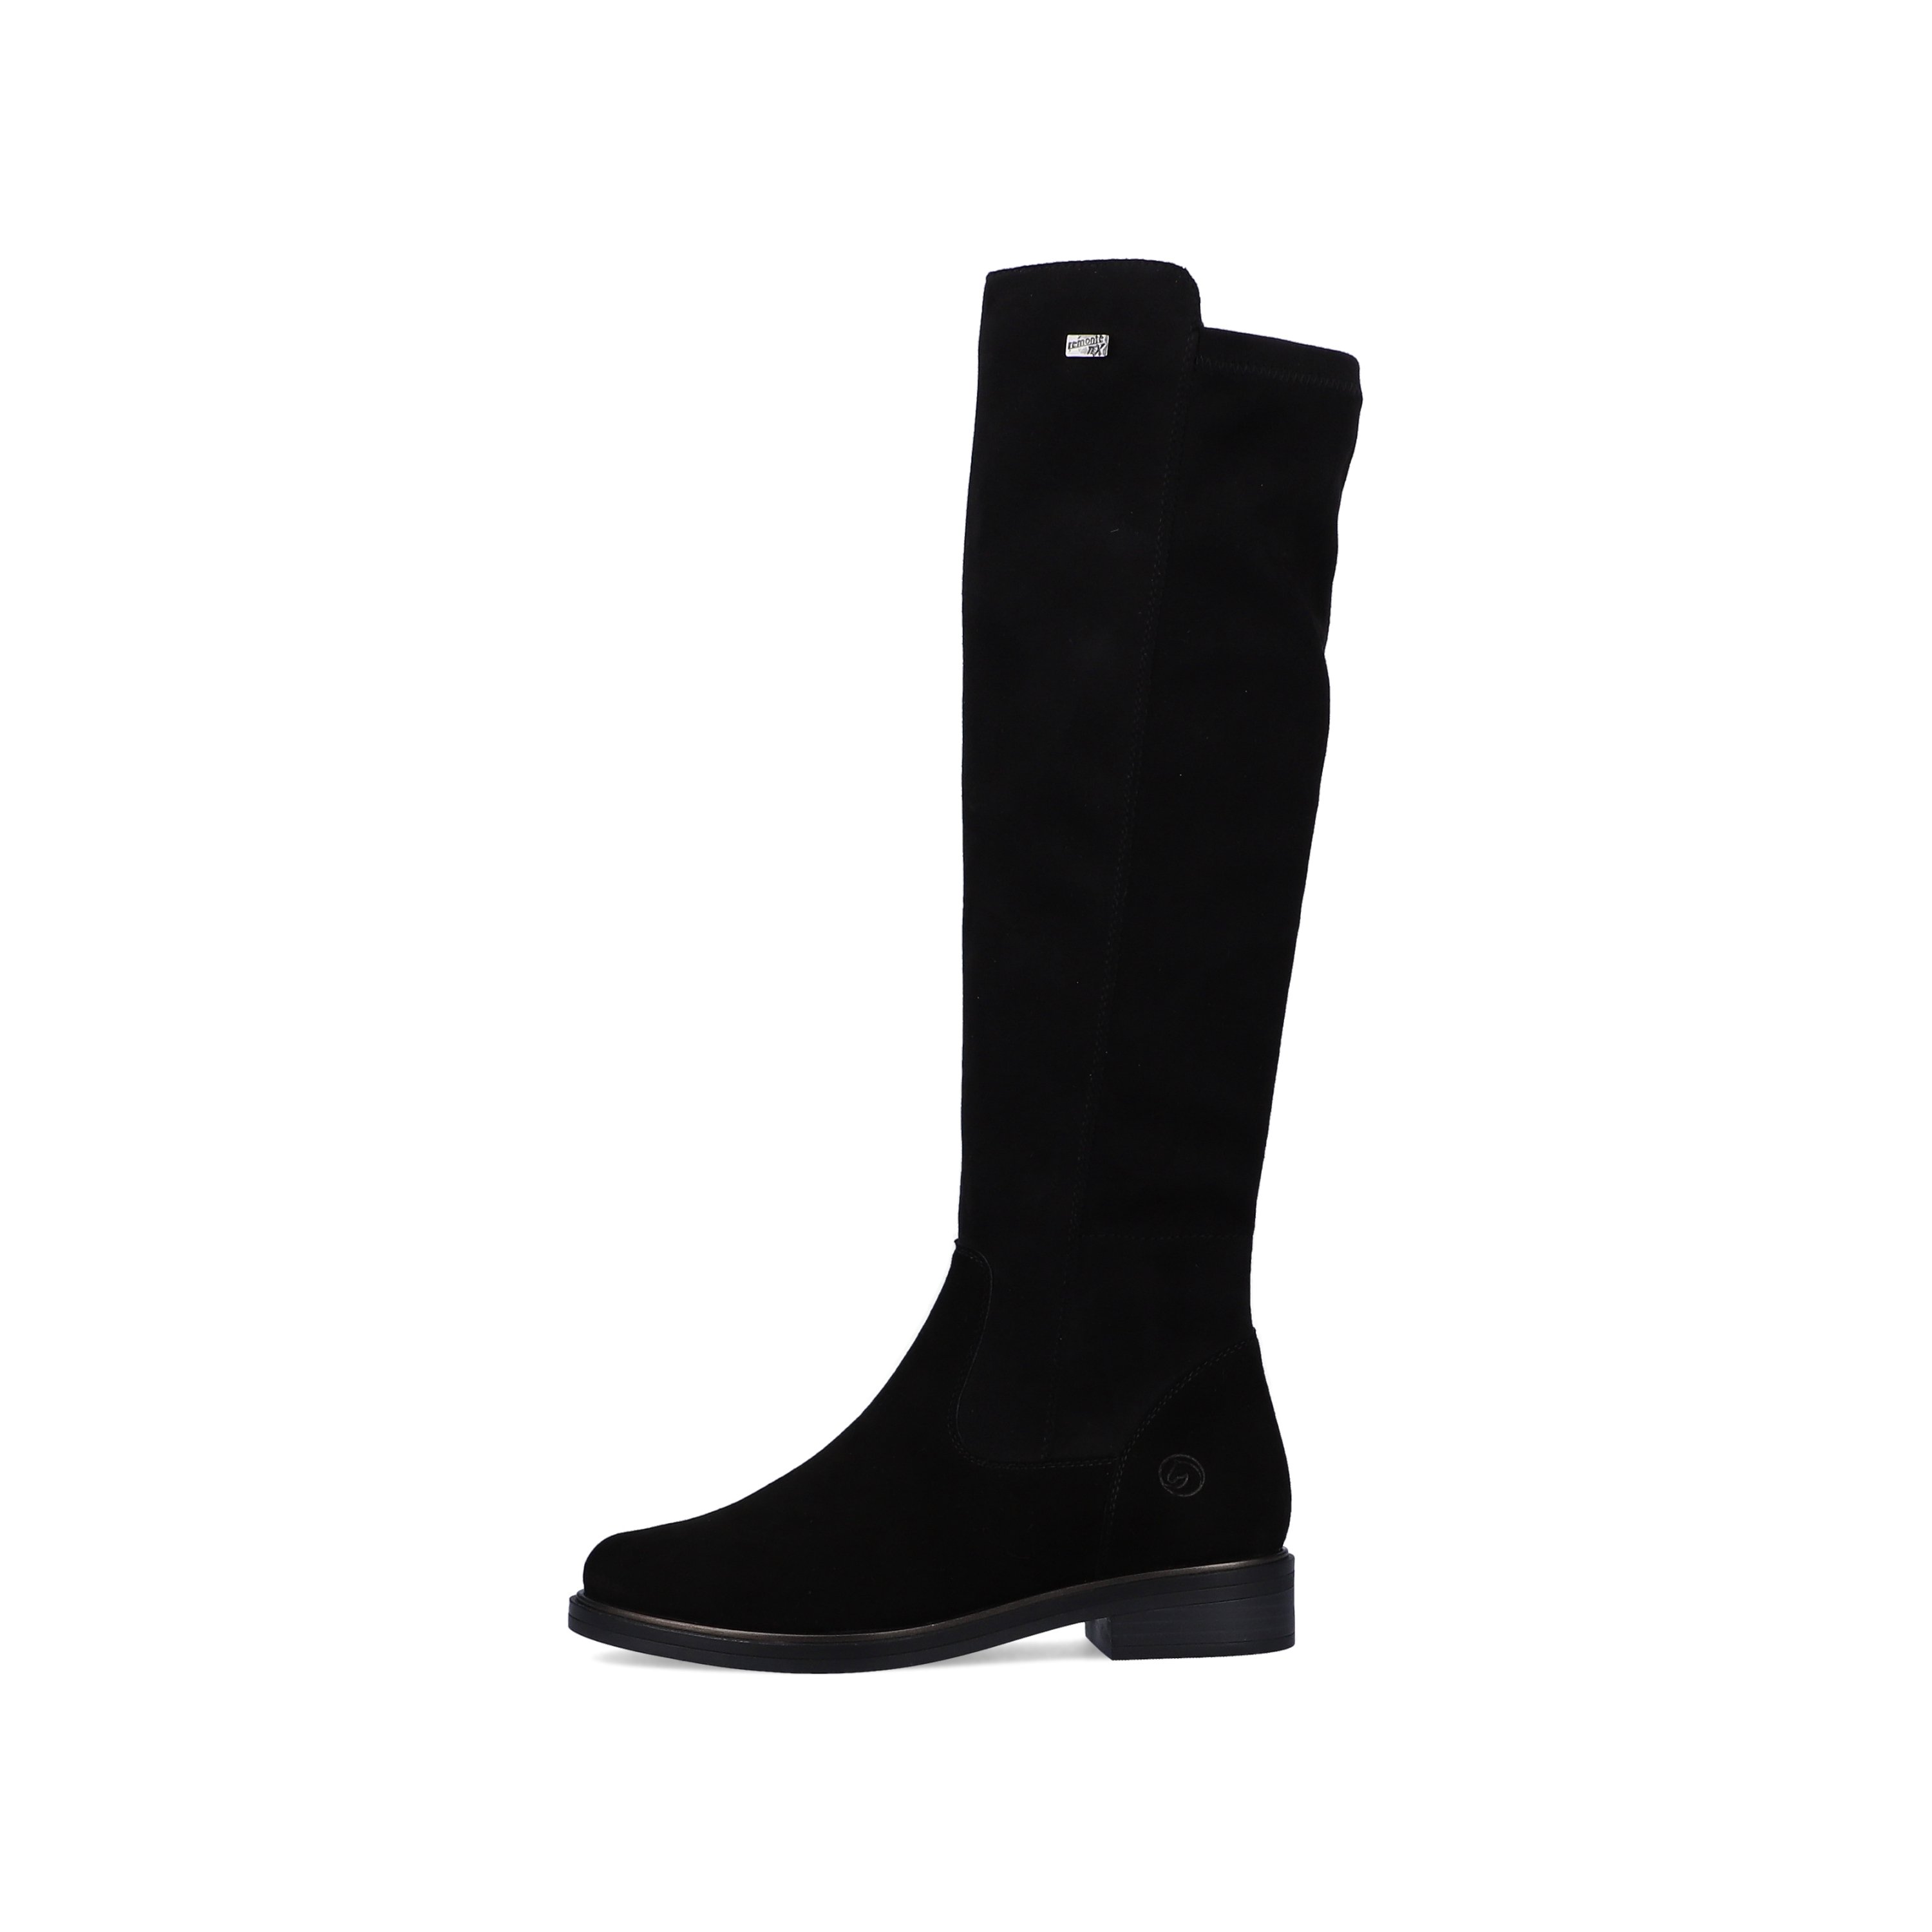 Jet black remonte women´s high boots D8387-02 with cushioning profile sole. The outside of the shoe